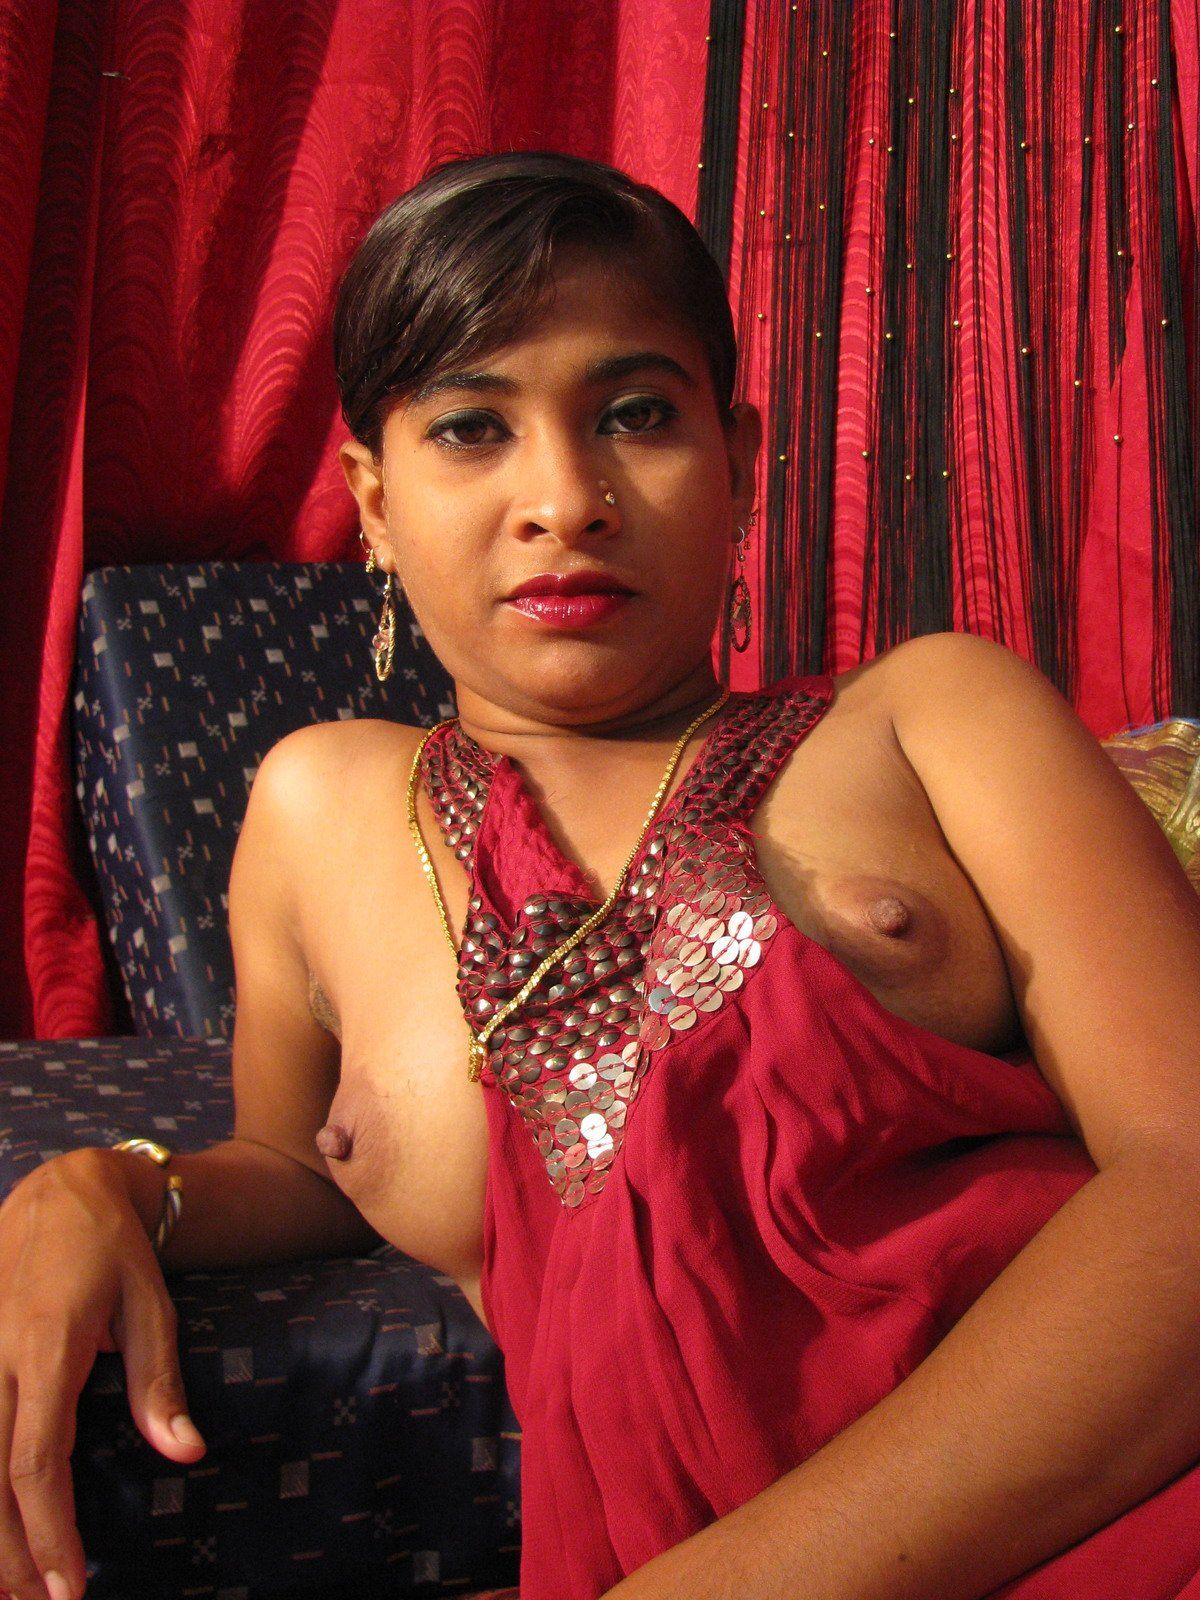 Xxx Indian Smoll Girl - India small boob - HOT porno free site gallery. Comments: 3